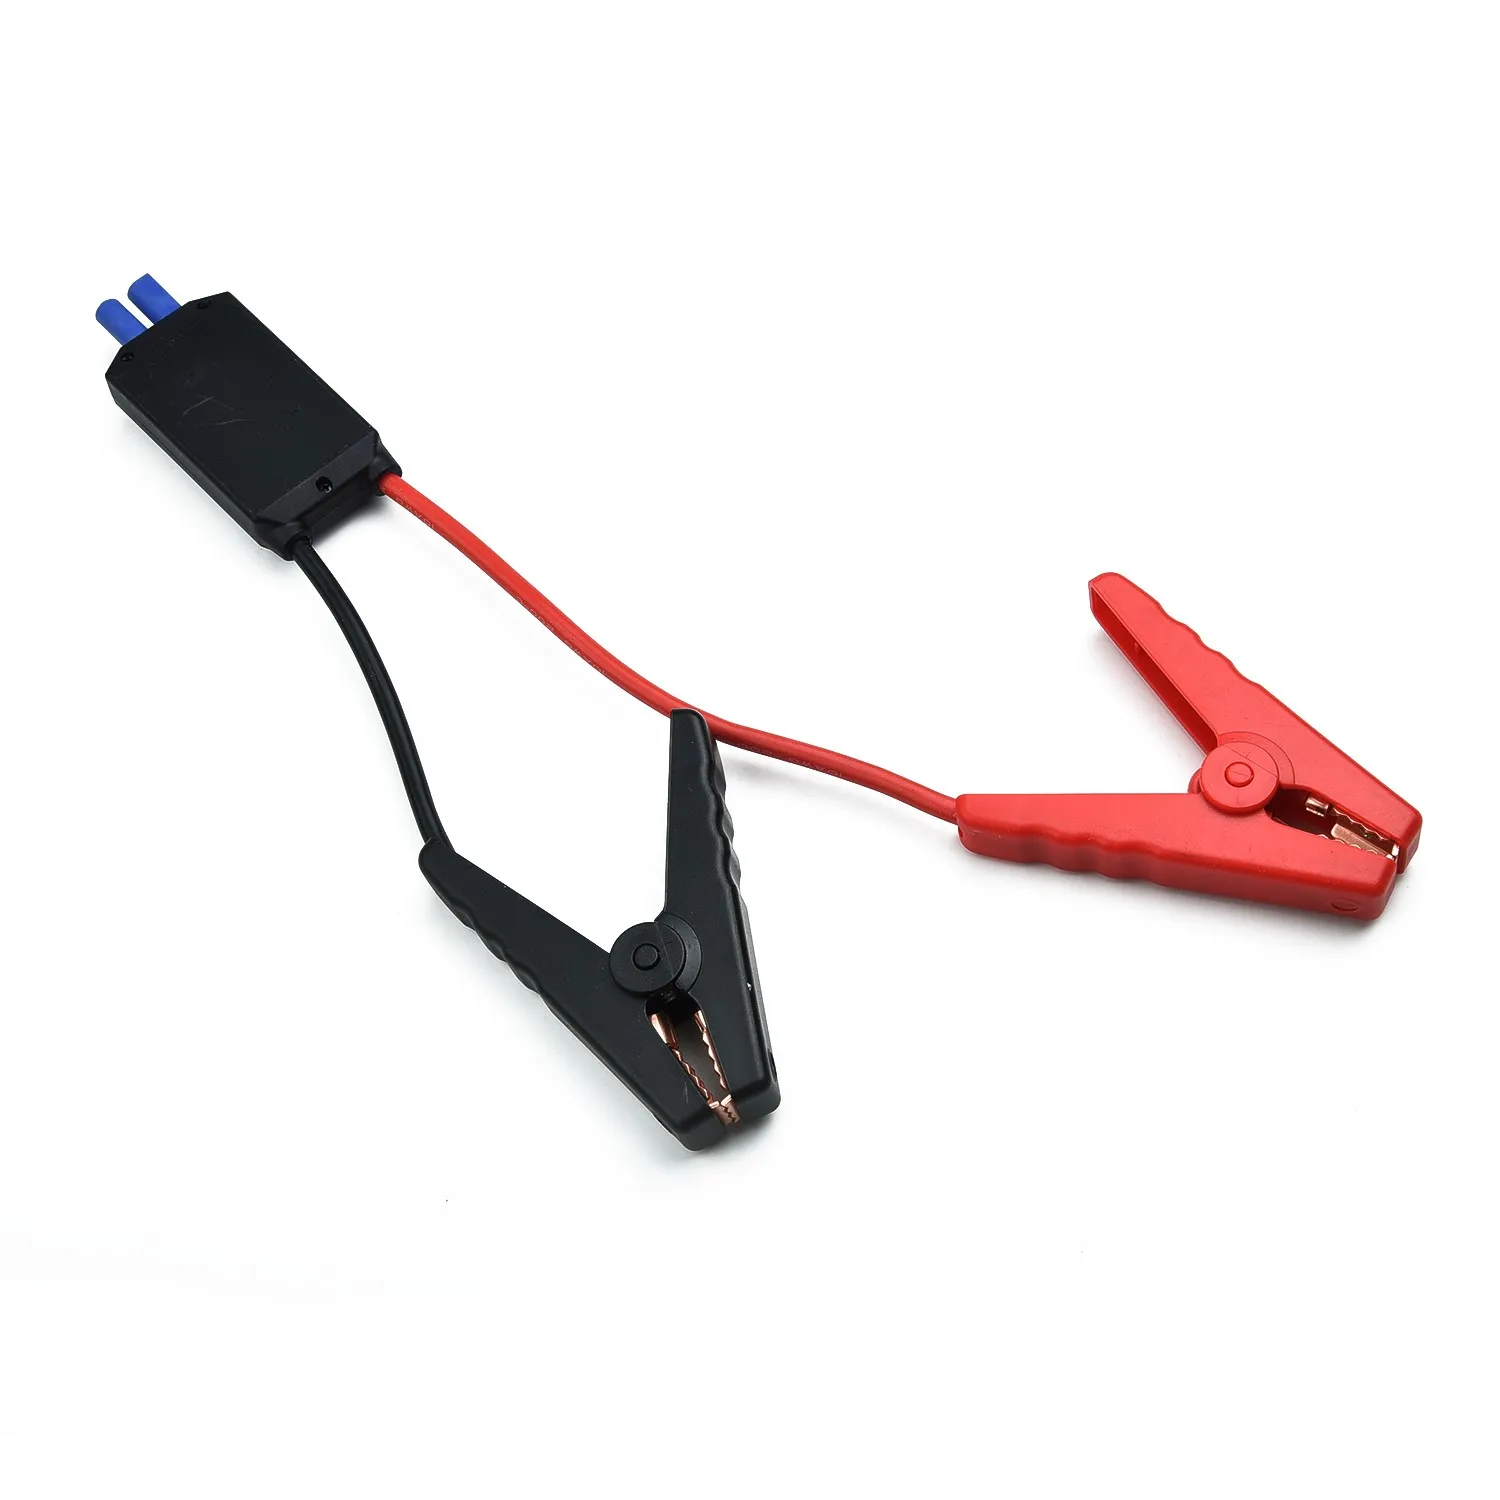 

12V Alligator Clamp 1PC Clip For Car Jump Starter Overcurrent automatic protection New Durable High quality Practical